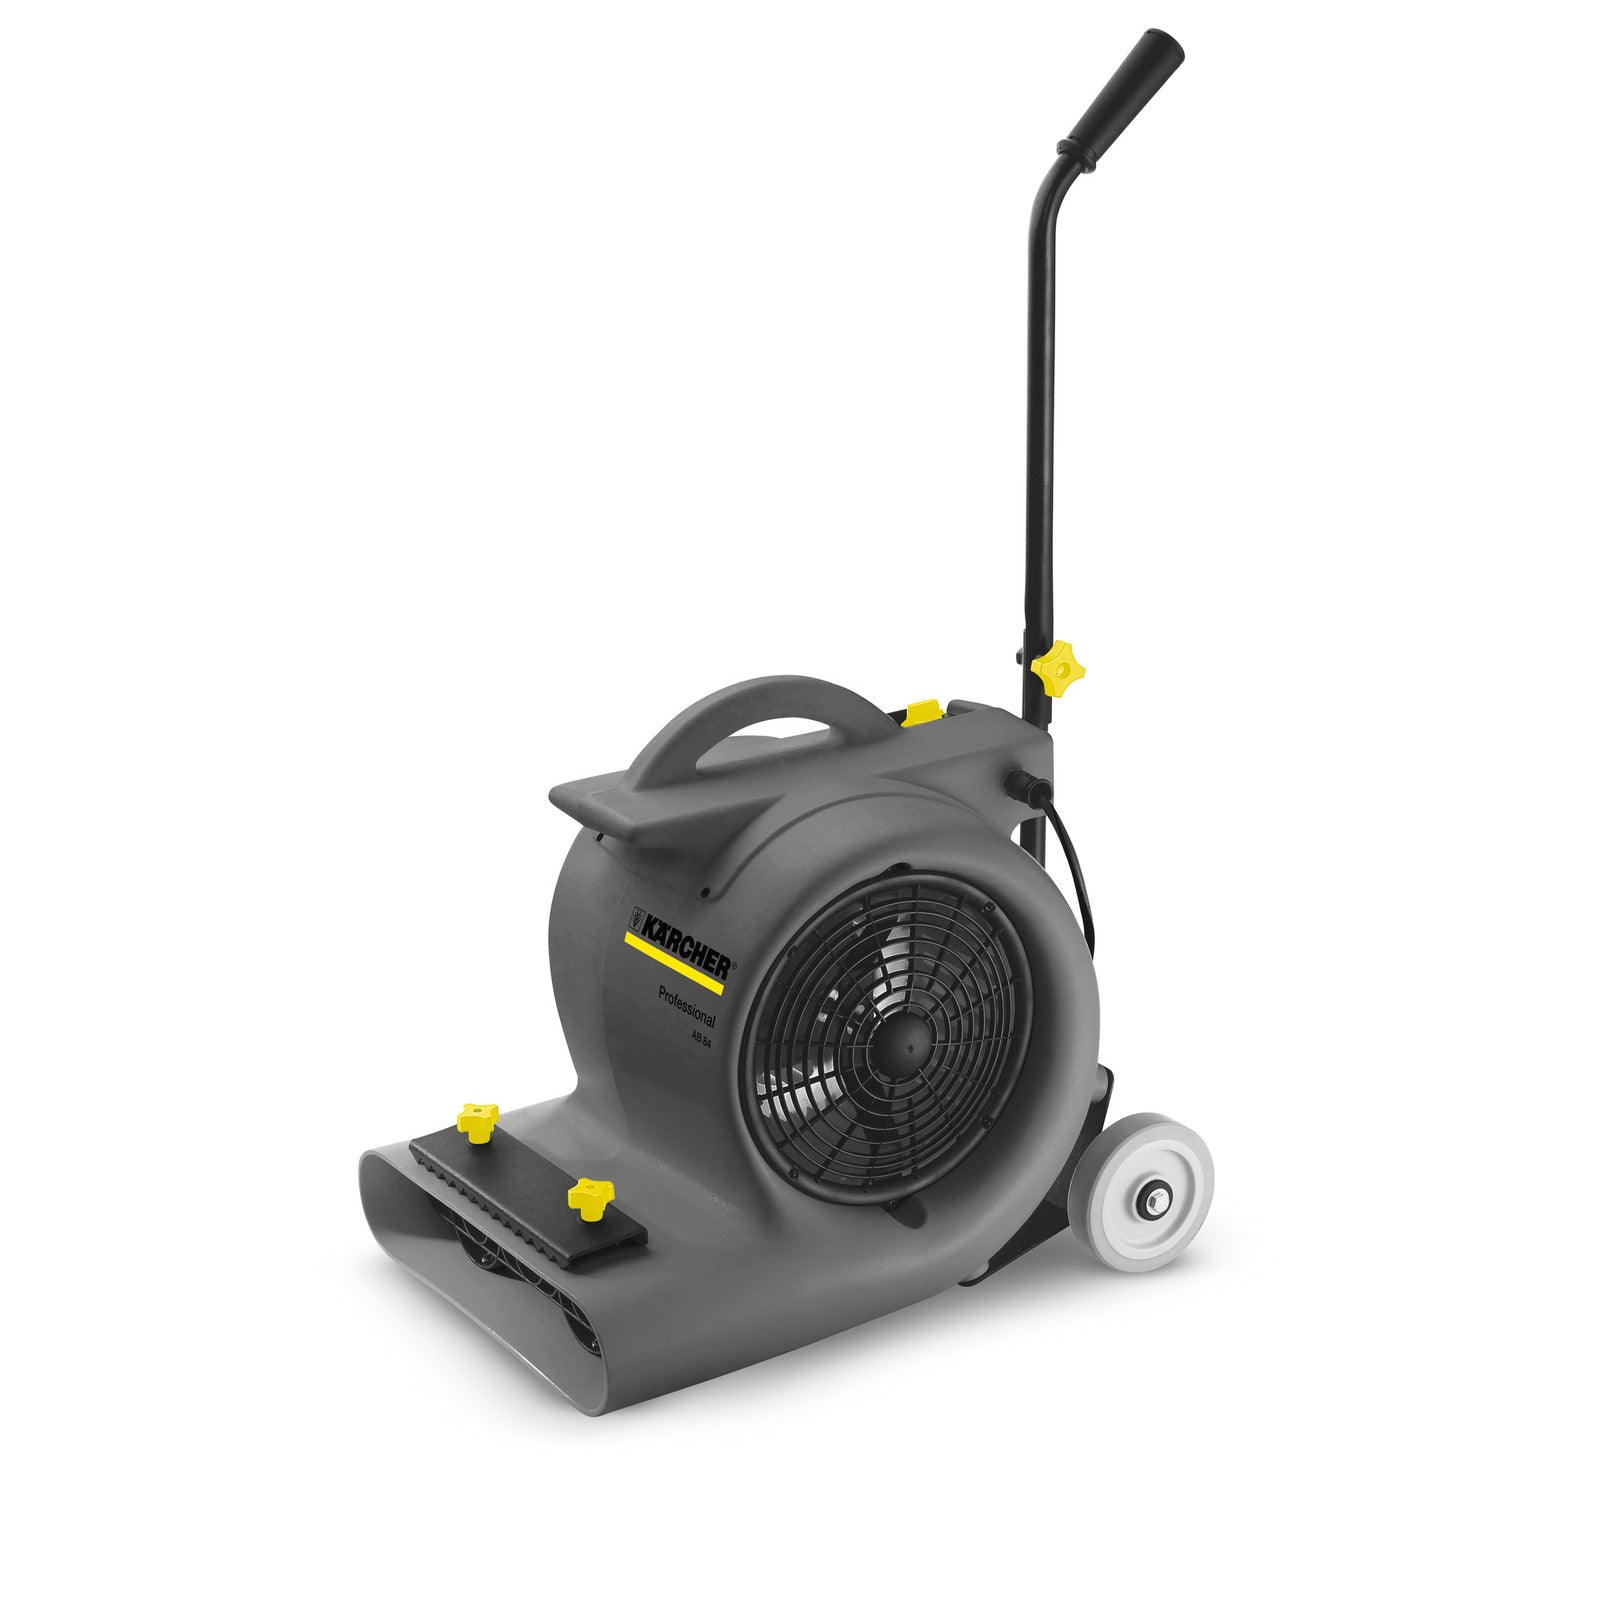 Karcher AB 84 CUL three-speed commercial air blower with upright handle (1.004-053.0) - CalCleaningEquipment